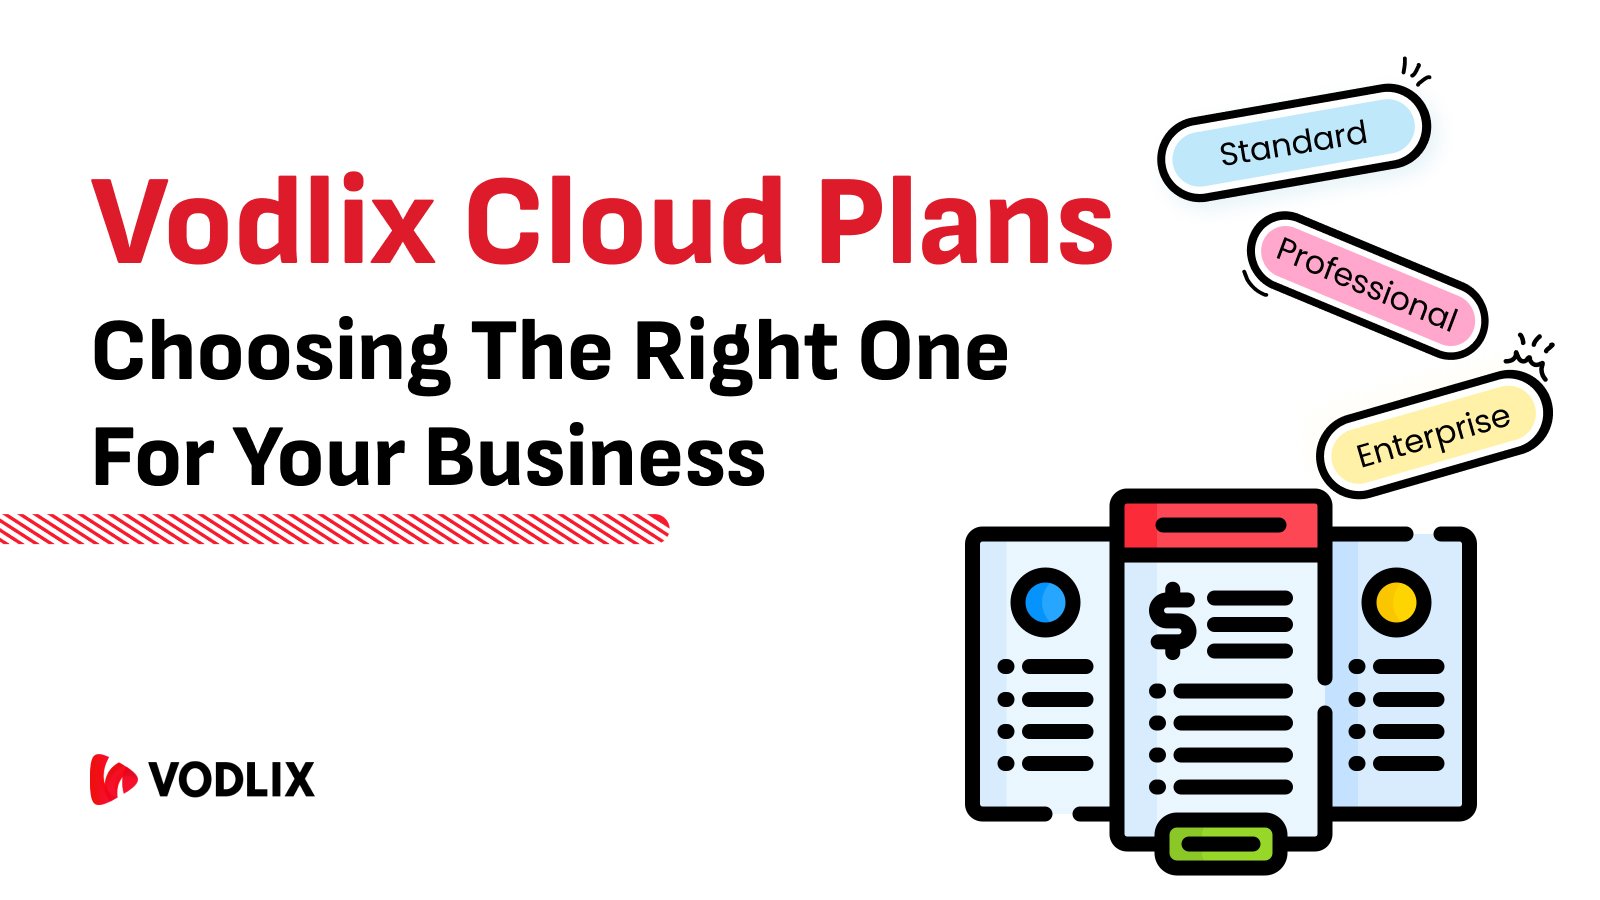 Vodlix Cloud Plans Explained: Choosing the Right One for Your Business